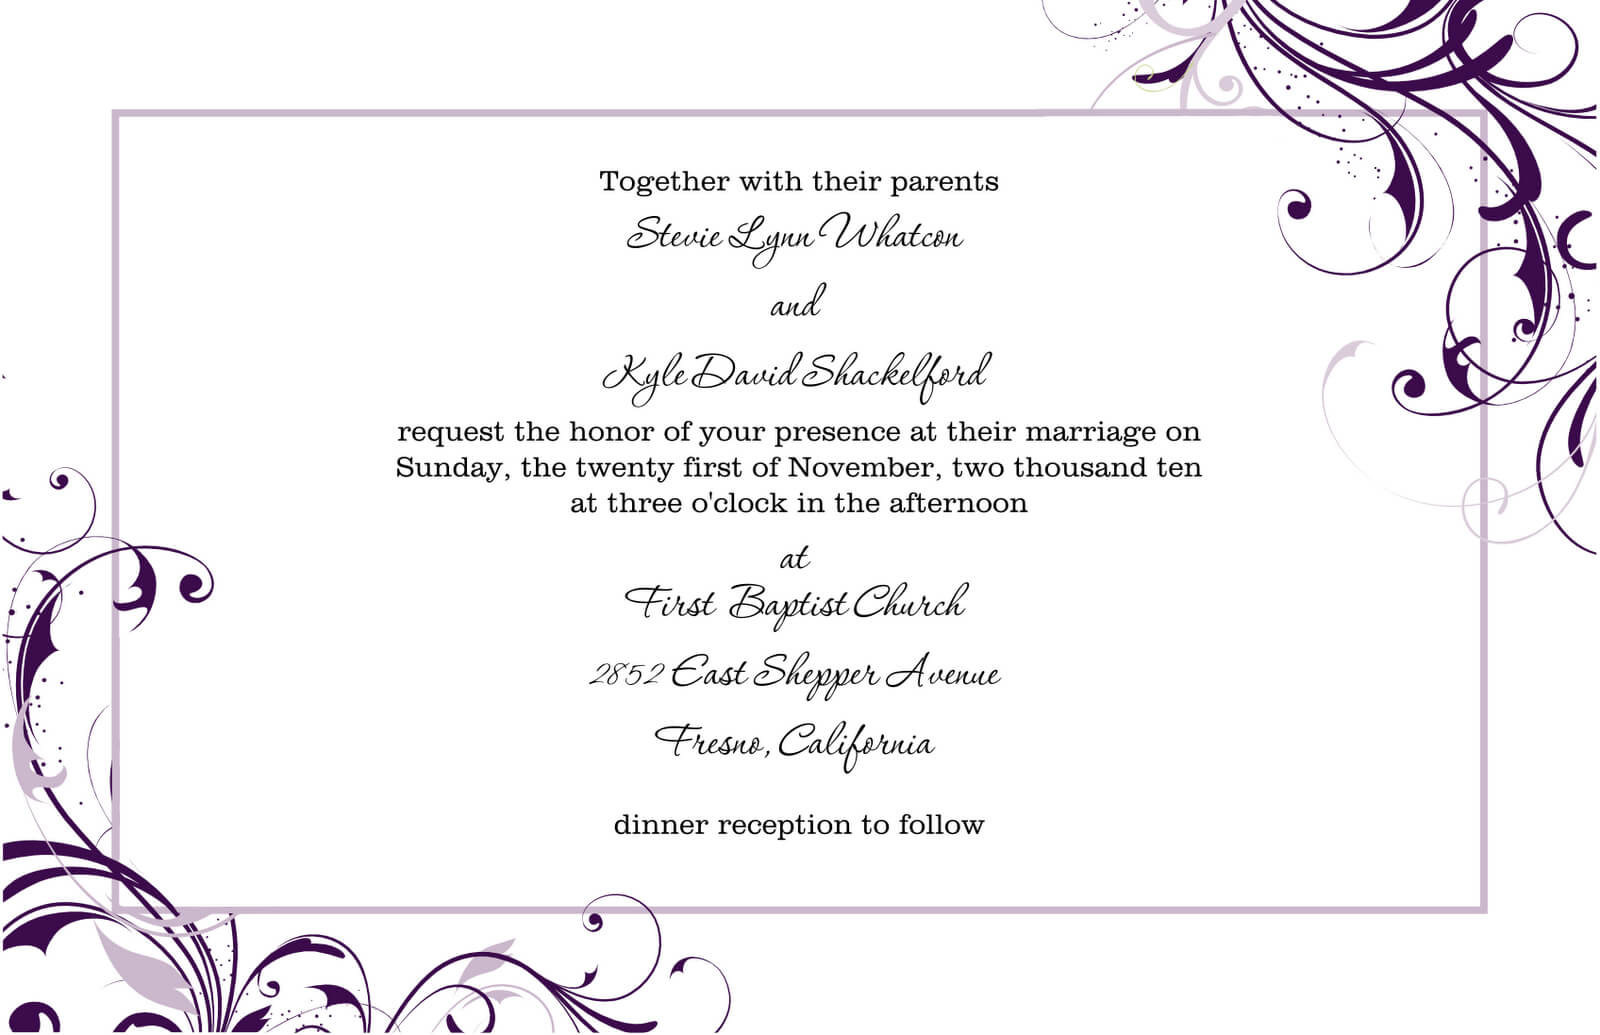 Free Party Invitation Template Word With Regard To Free Dinner Invitation Templates For Word